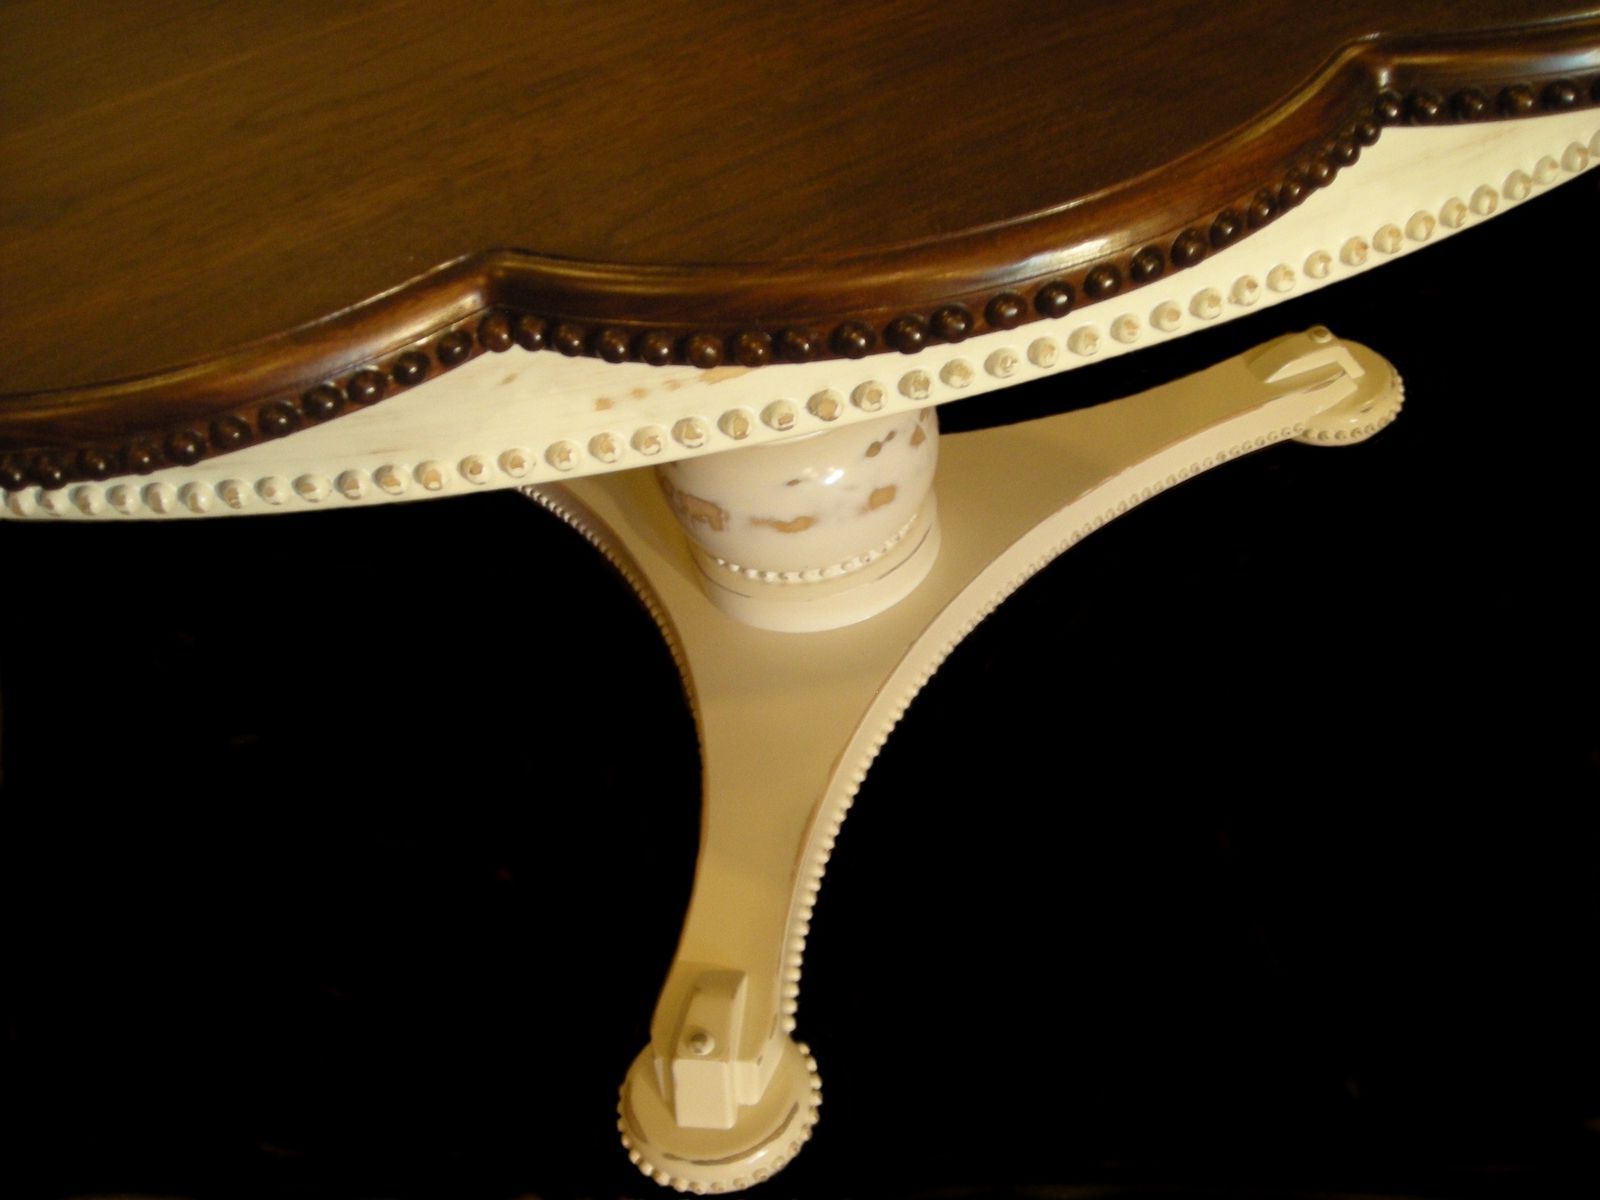 Custom French Country Dining Table With Beaded Scalloped Within Most Current Walnut And Antique White Finish Contemporary Country Dining Tables (View 21 of 30)